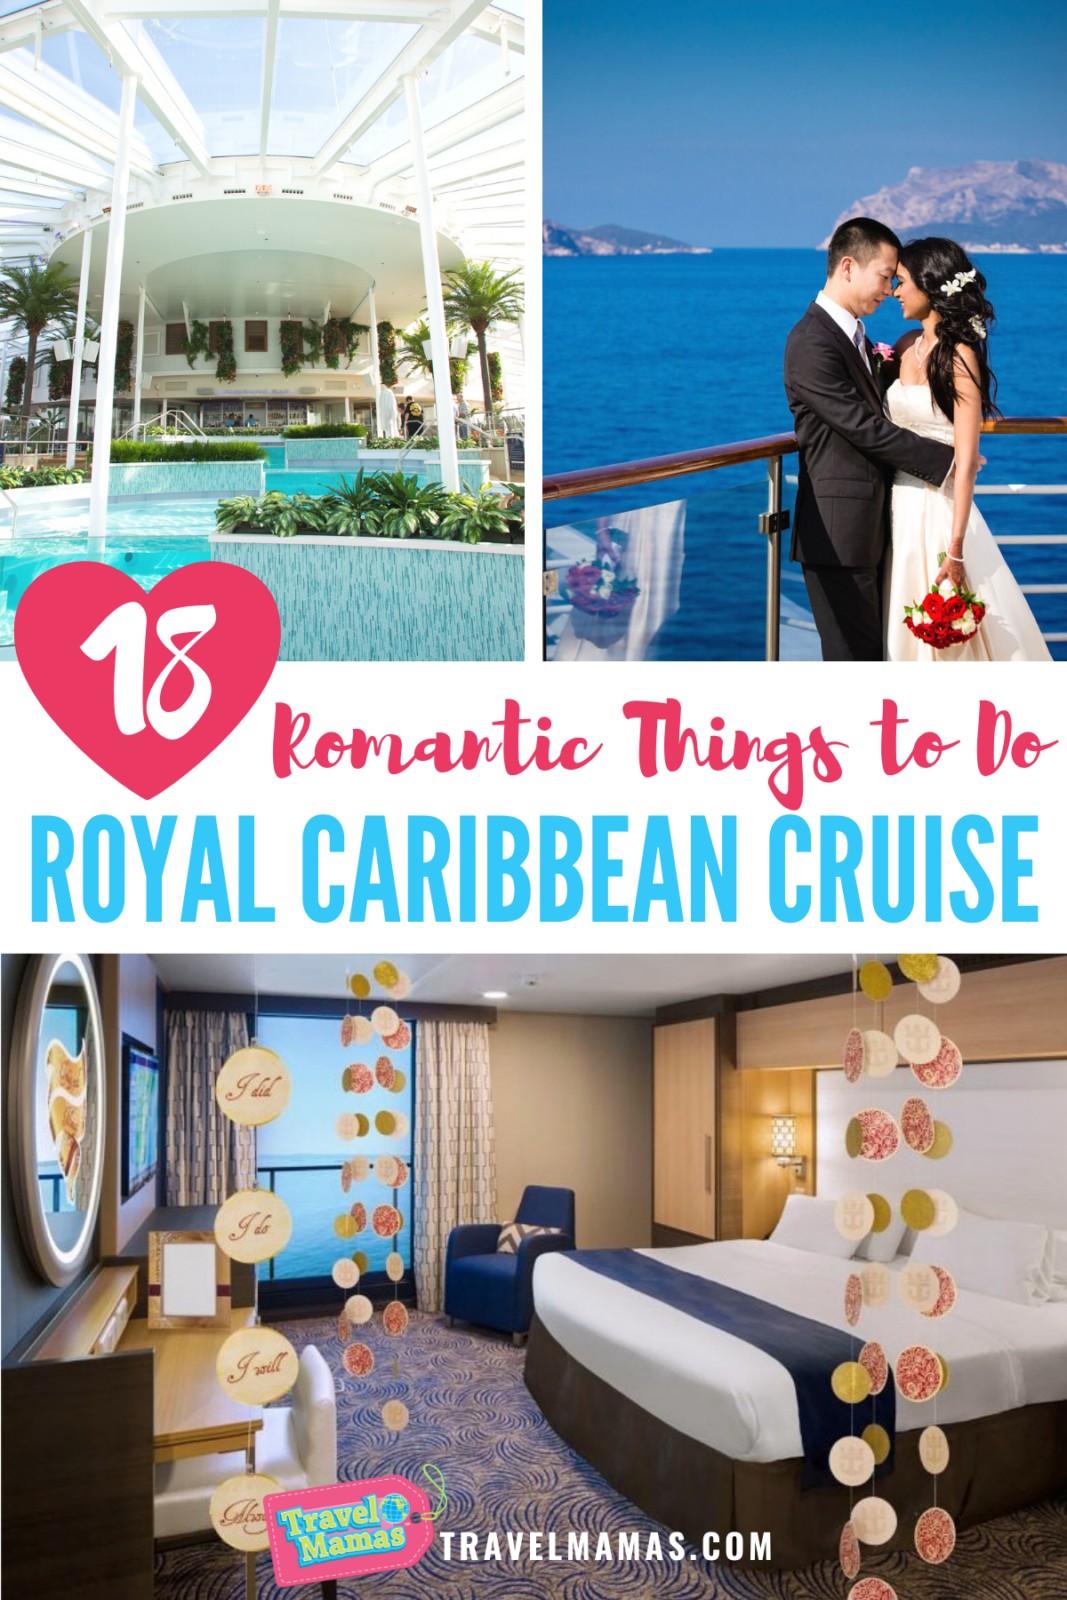 Romantic Things for Couples to Do on a Royal Caribbean Cruise